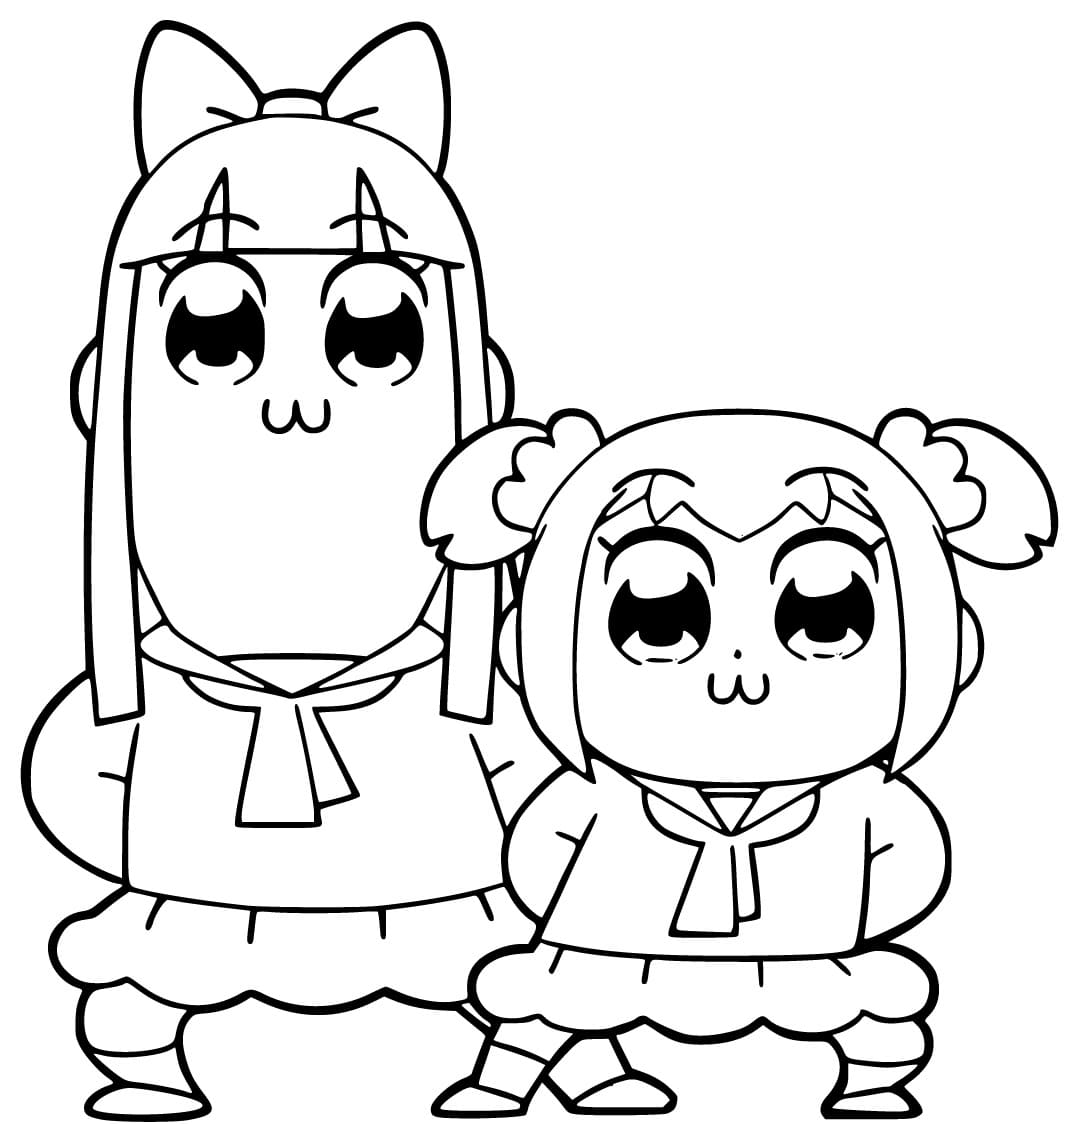 Pipimi and Popuko from Pop Team Epic